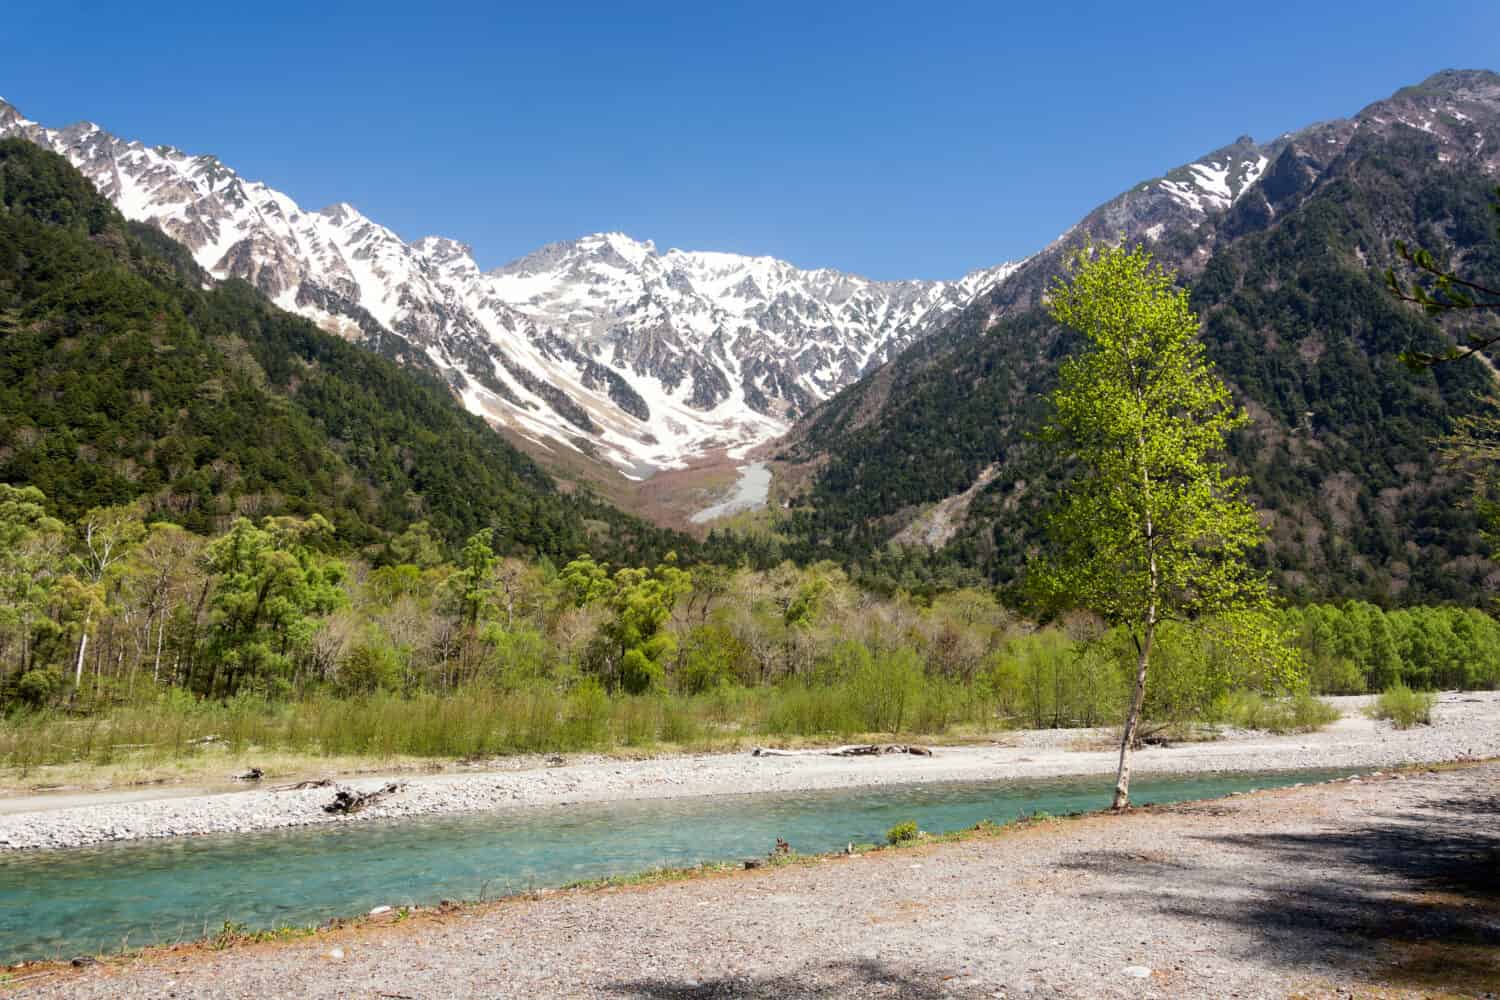 View on valley of Kamikochi, Chubu Sangaku National Park, Nagano, Japan. Beautiful surroundings in the Japan Alps for hiking, walking and to enjoy nature to the fullest. To be in harmony with nature.